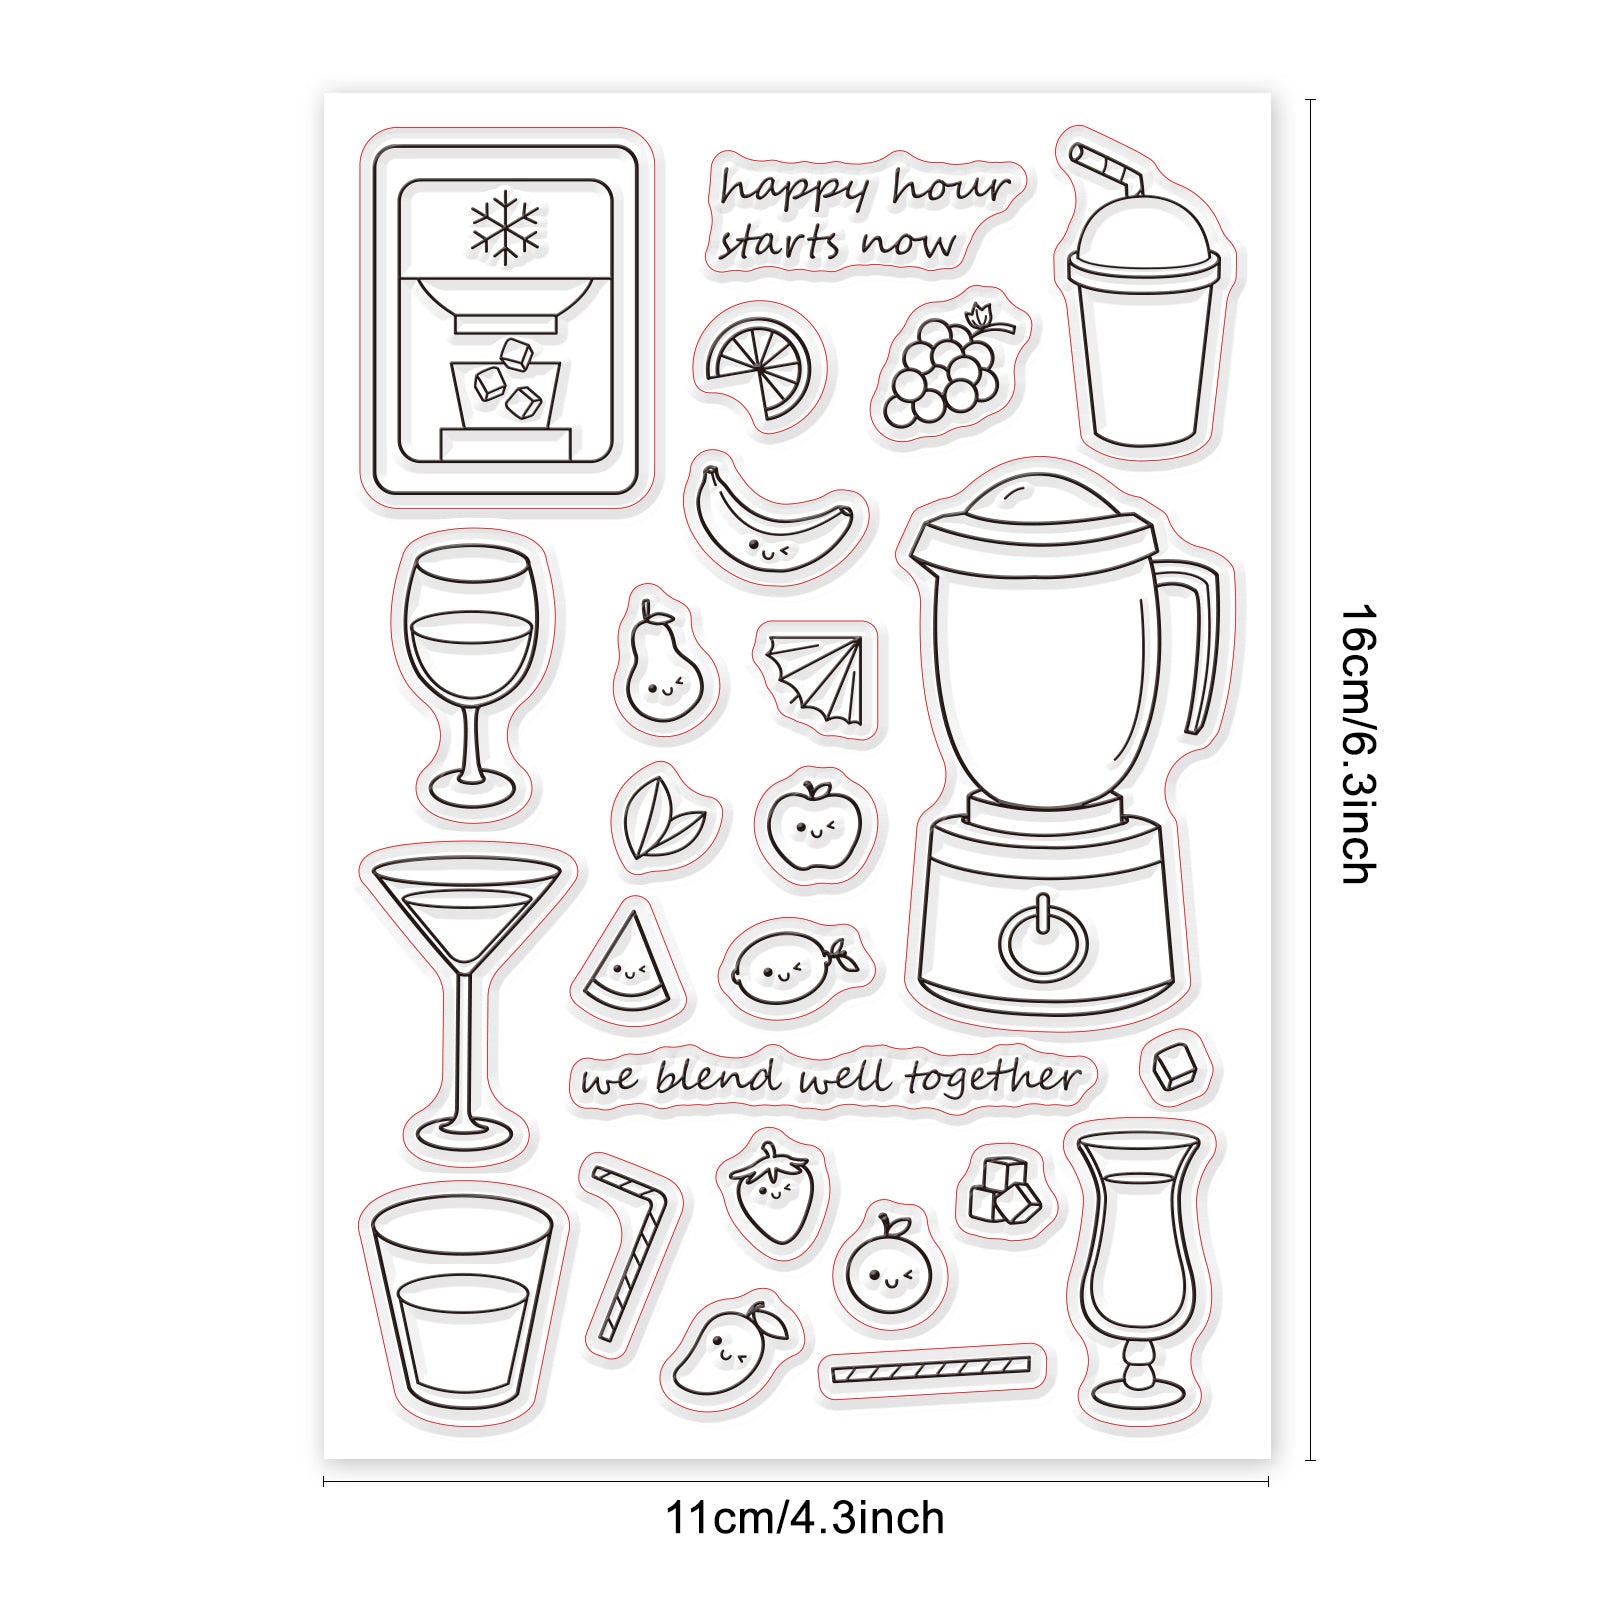 Globleland Ice Maker, Cup, Lemon Slices, Grapes, Bananas, Pears, Watermelon, Lemons, Strawberries, Straws, Mangoes, Oranges, Ice Cubes, Juicer Clear Stamps Silicone Stamp Seal for Card Making Decoration and DIY Scrapbooking